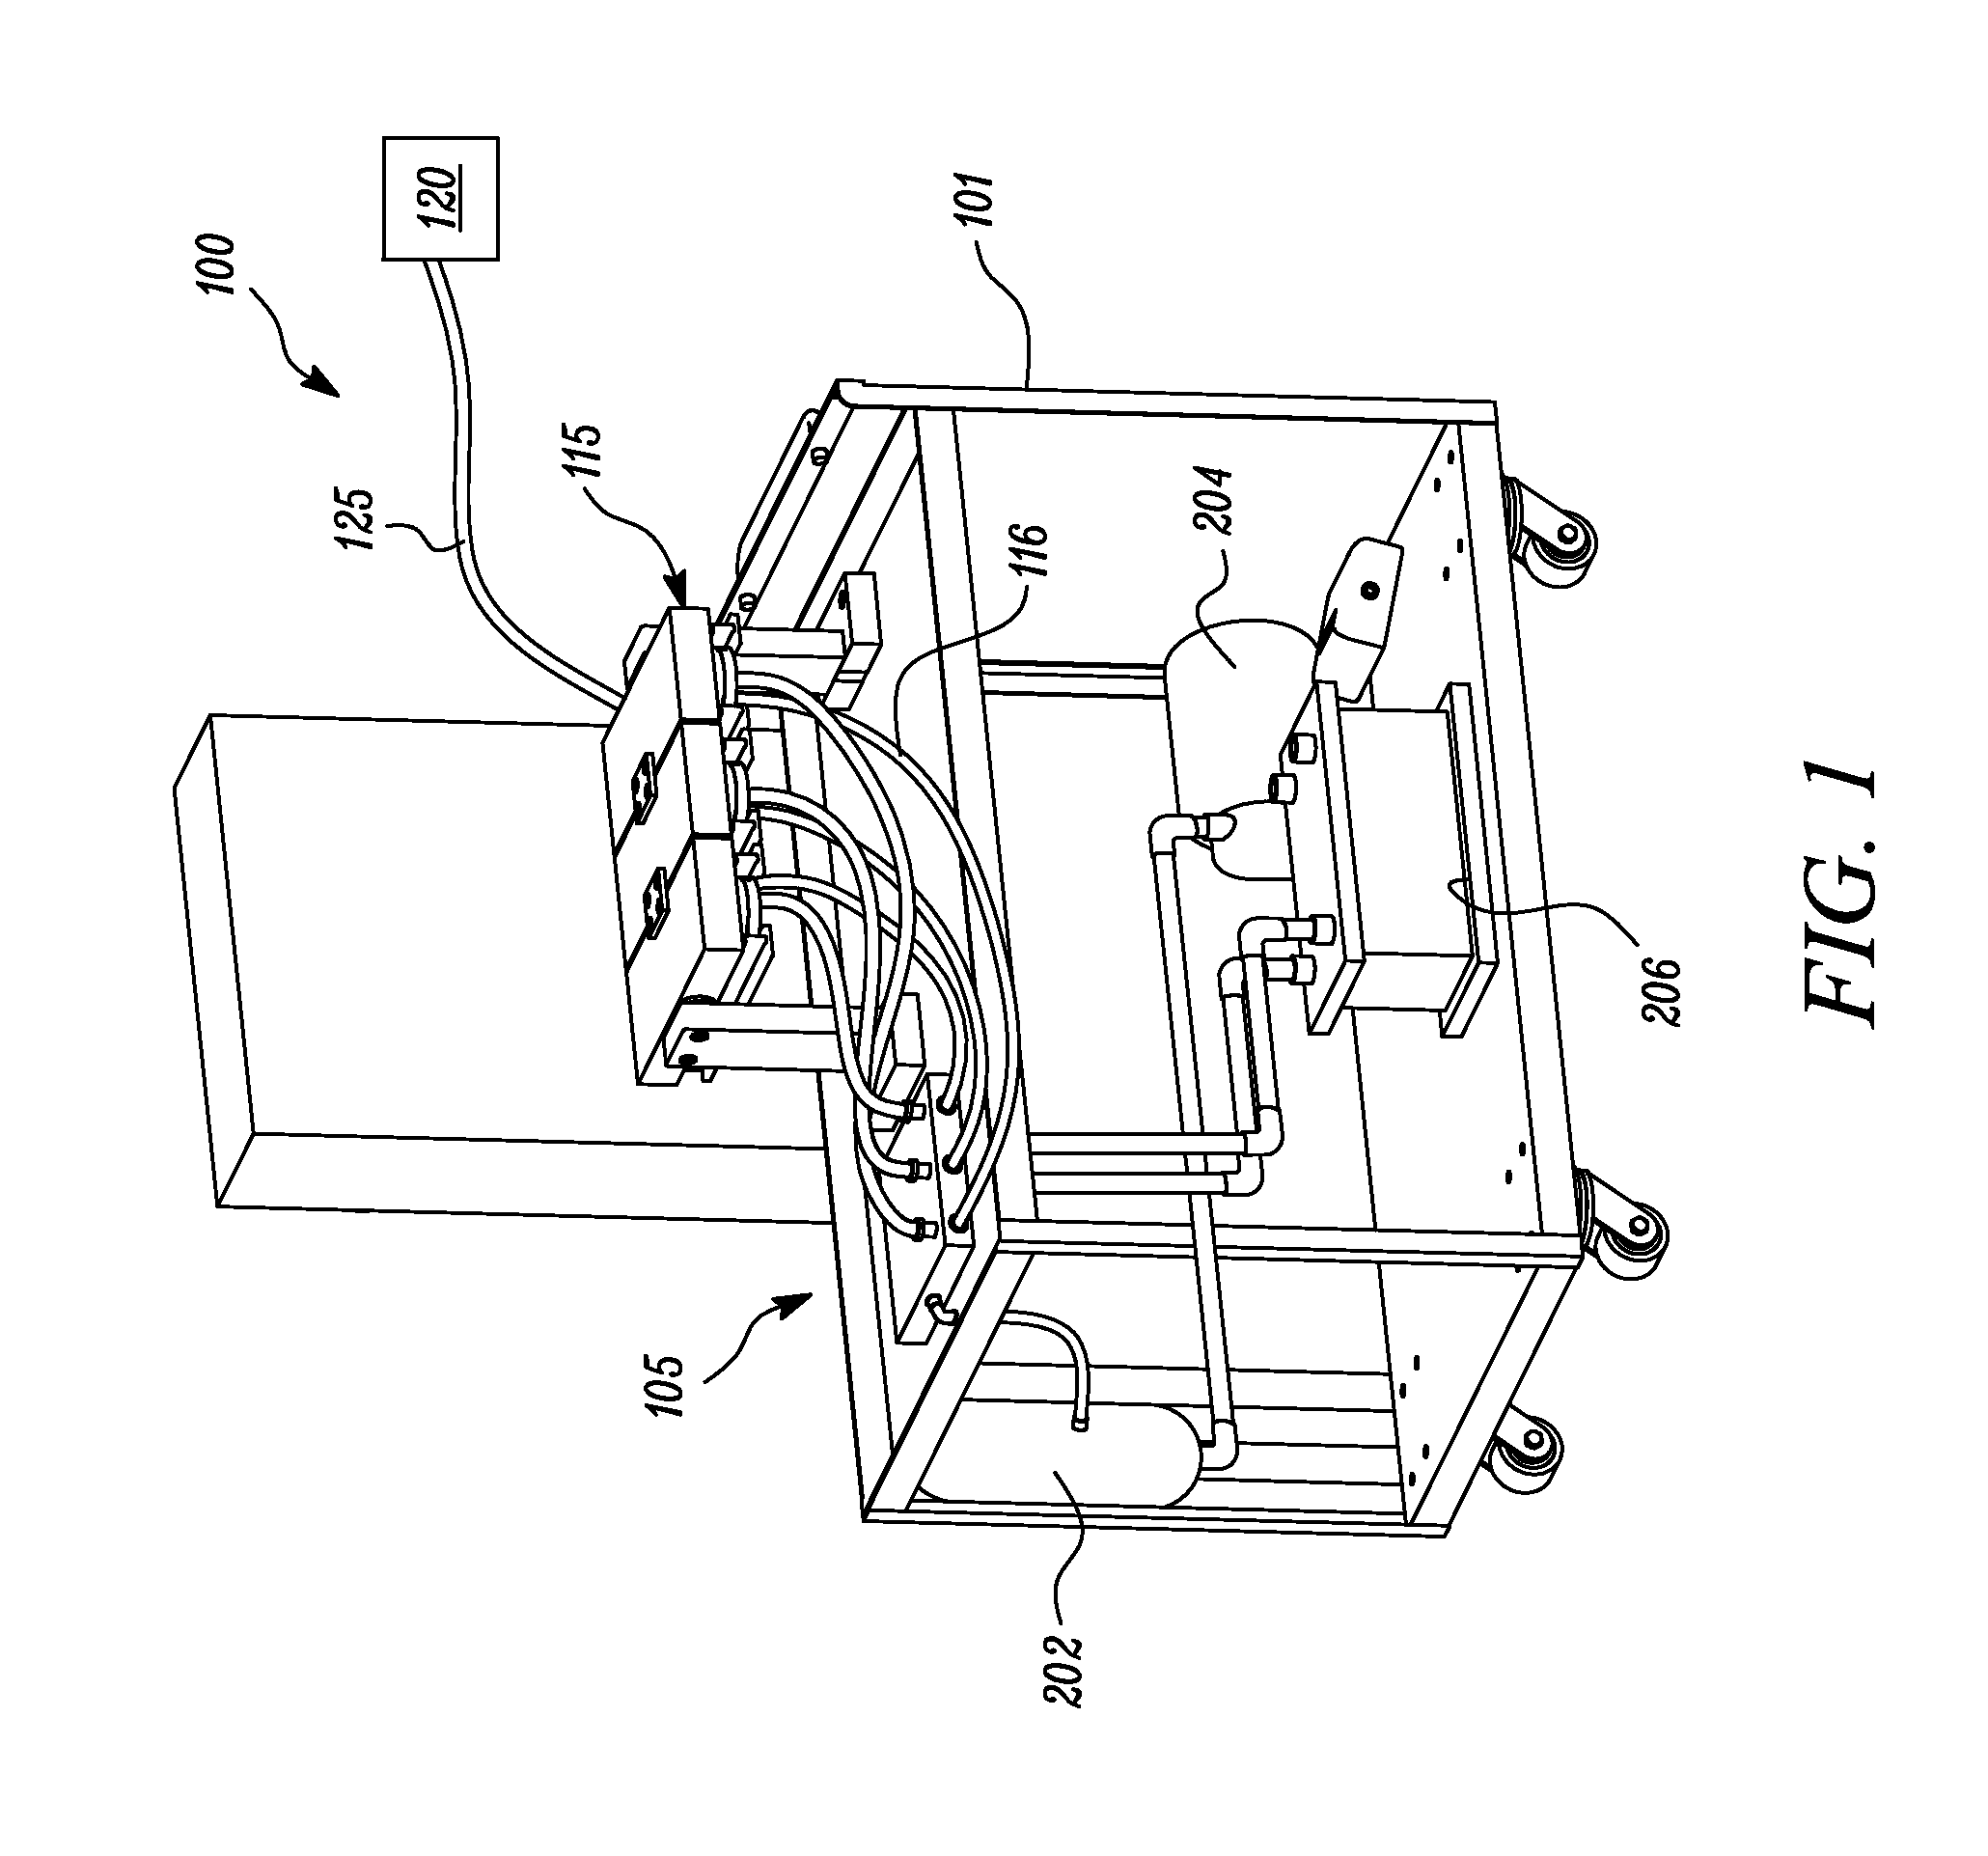 System and method for testing of seal materials